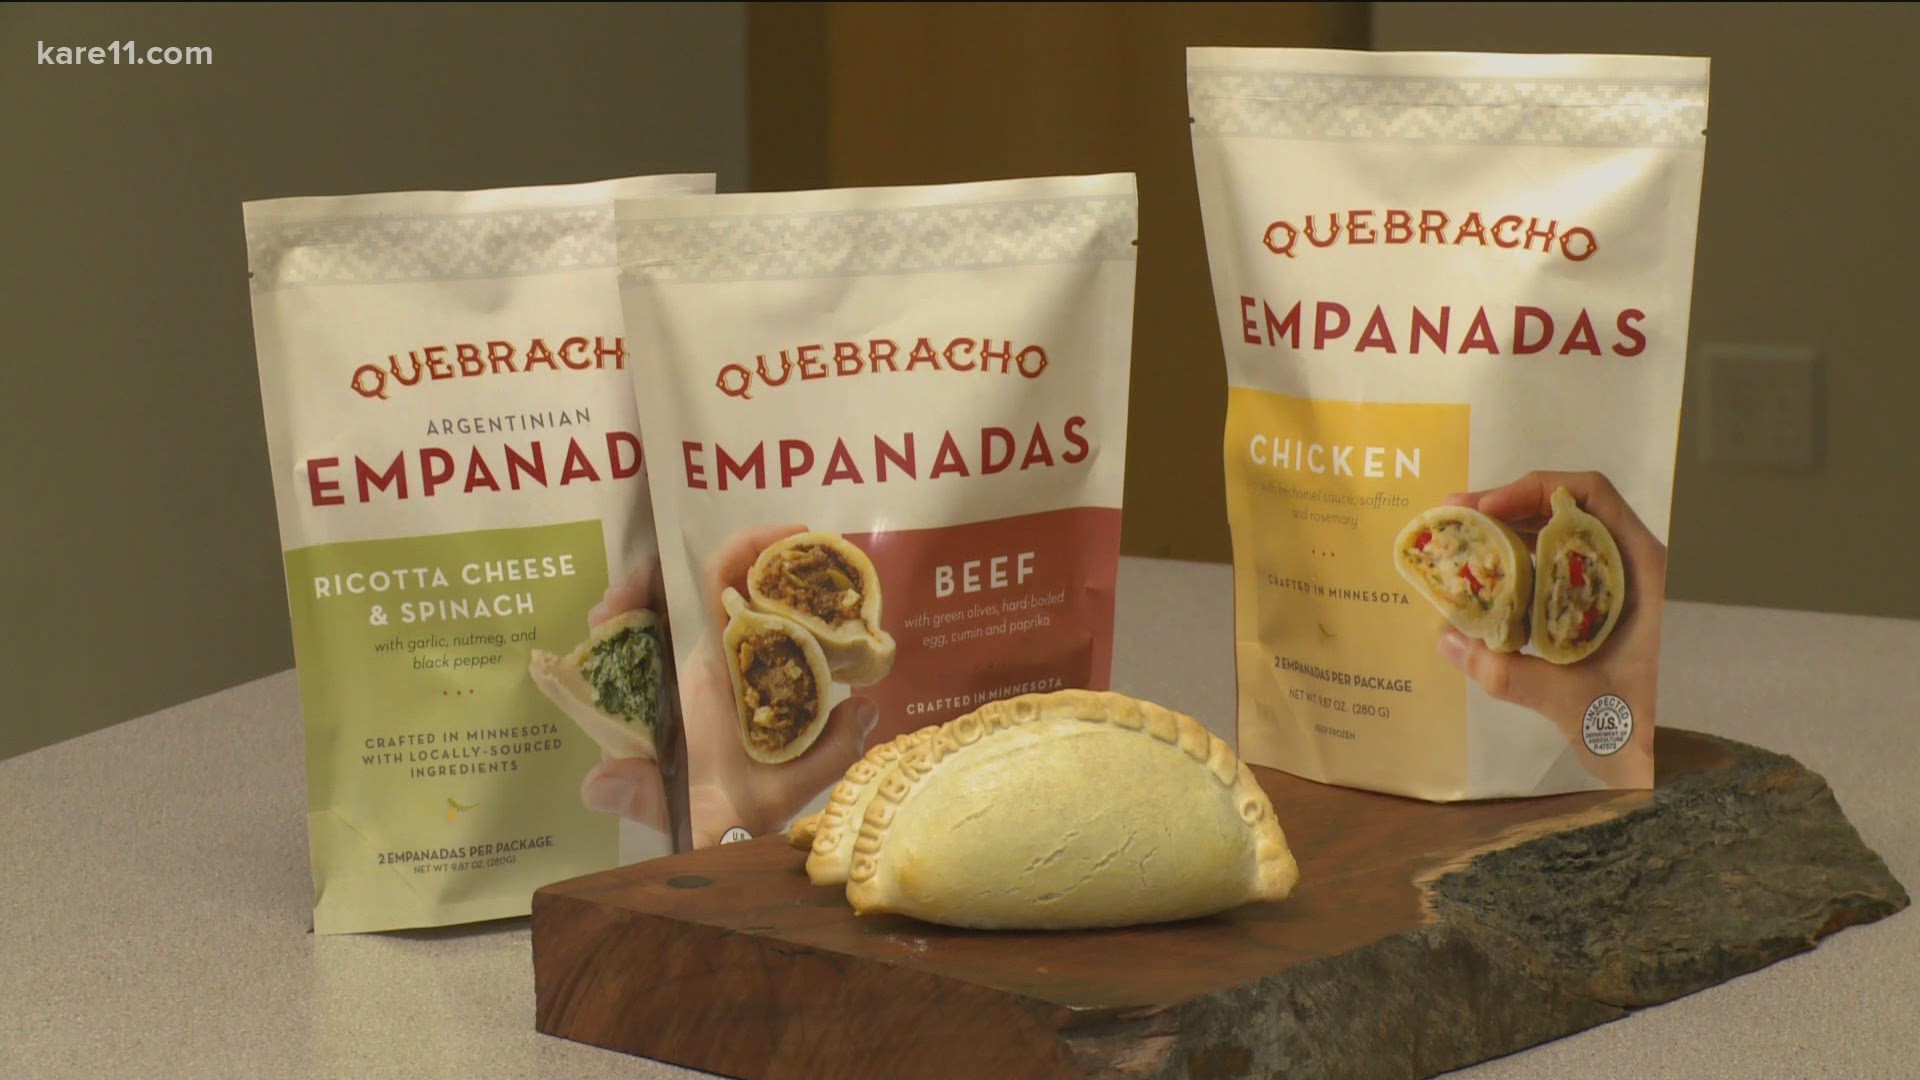 Missing her family in Argentina, Belén Rodríguez started making empanadas that can now be found in Minnesota grocery stores.